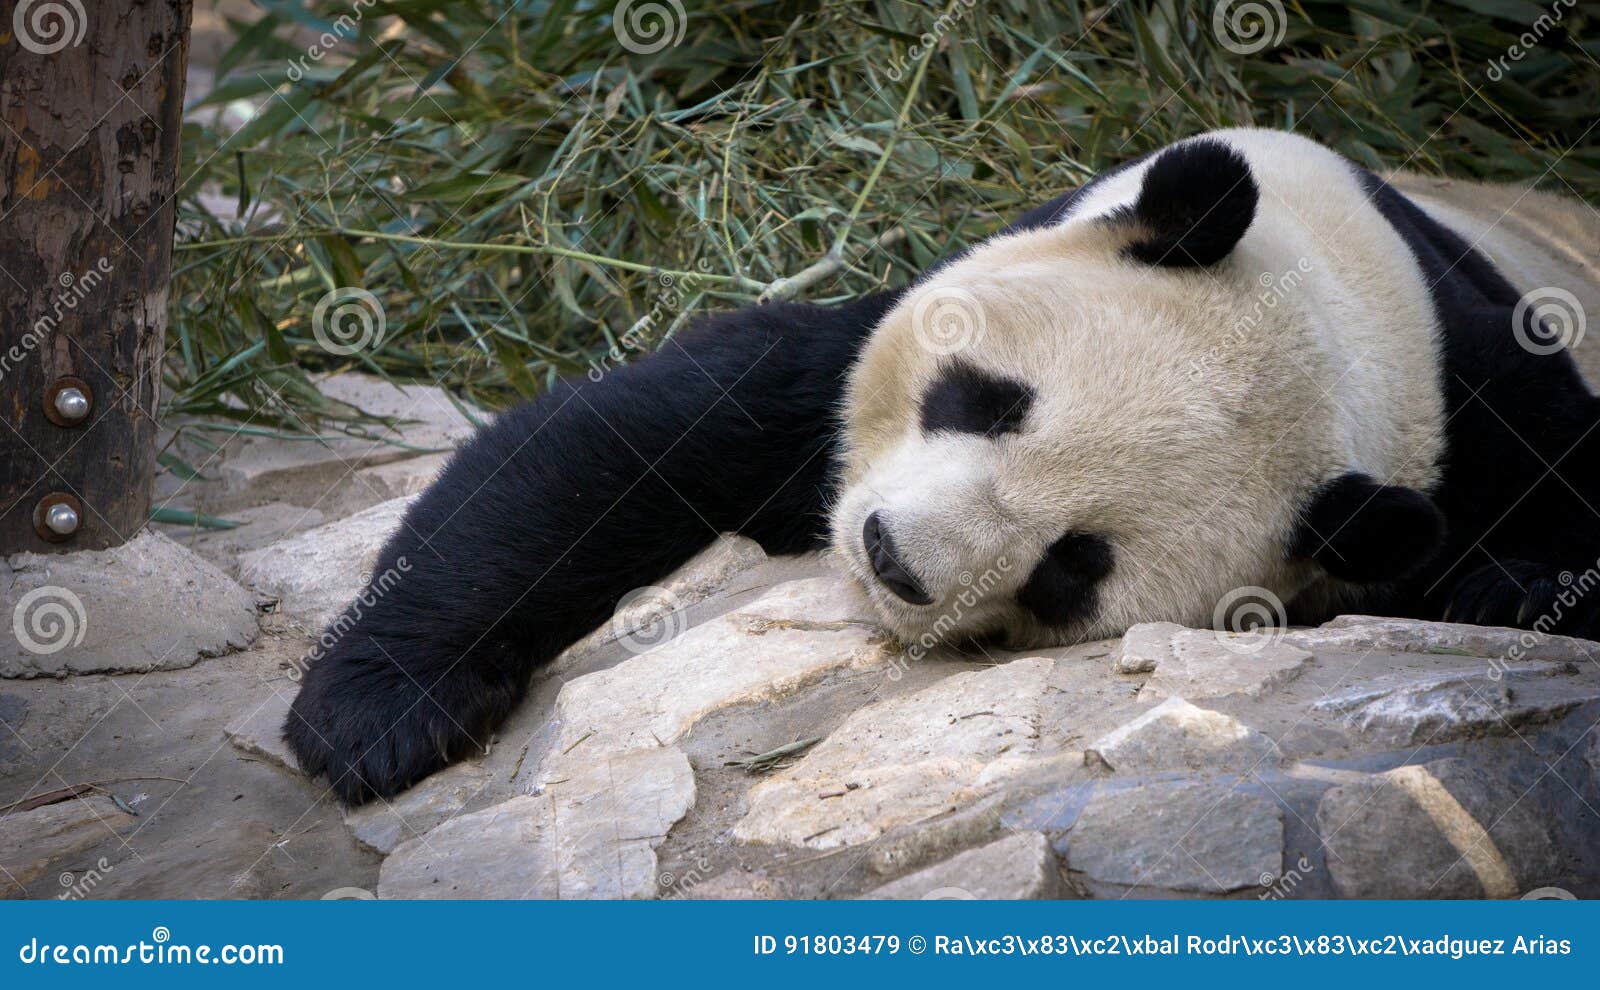 giant panda resting at the zoo